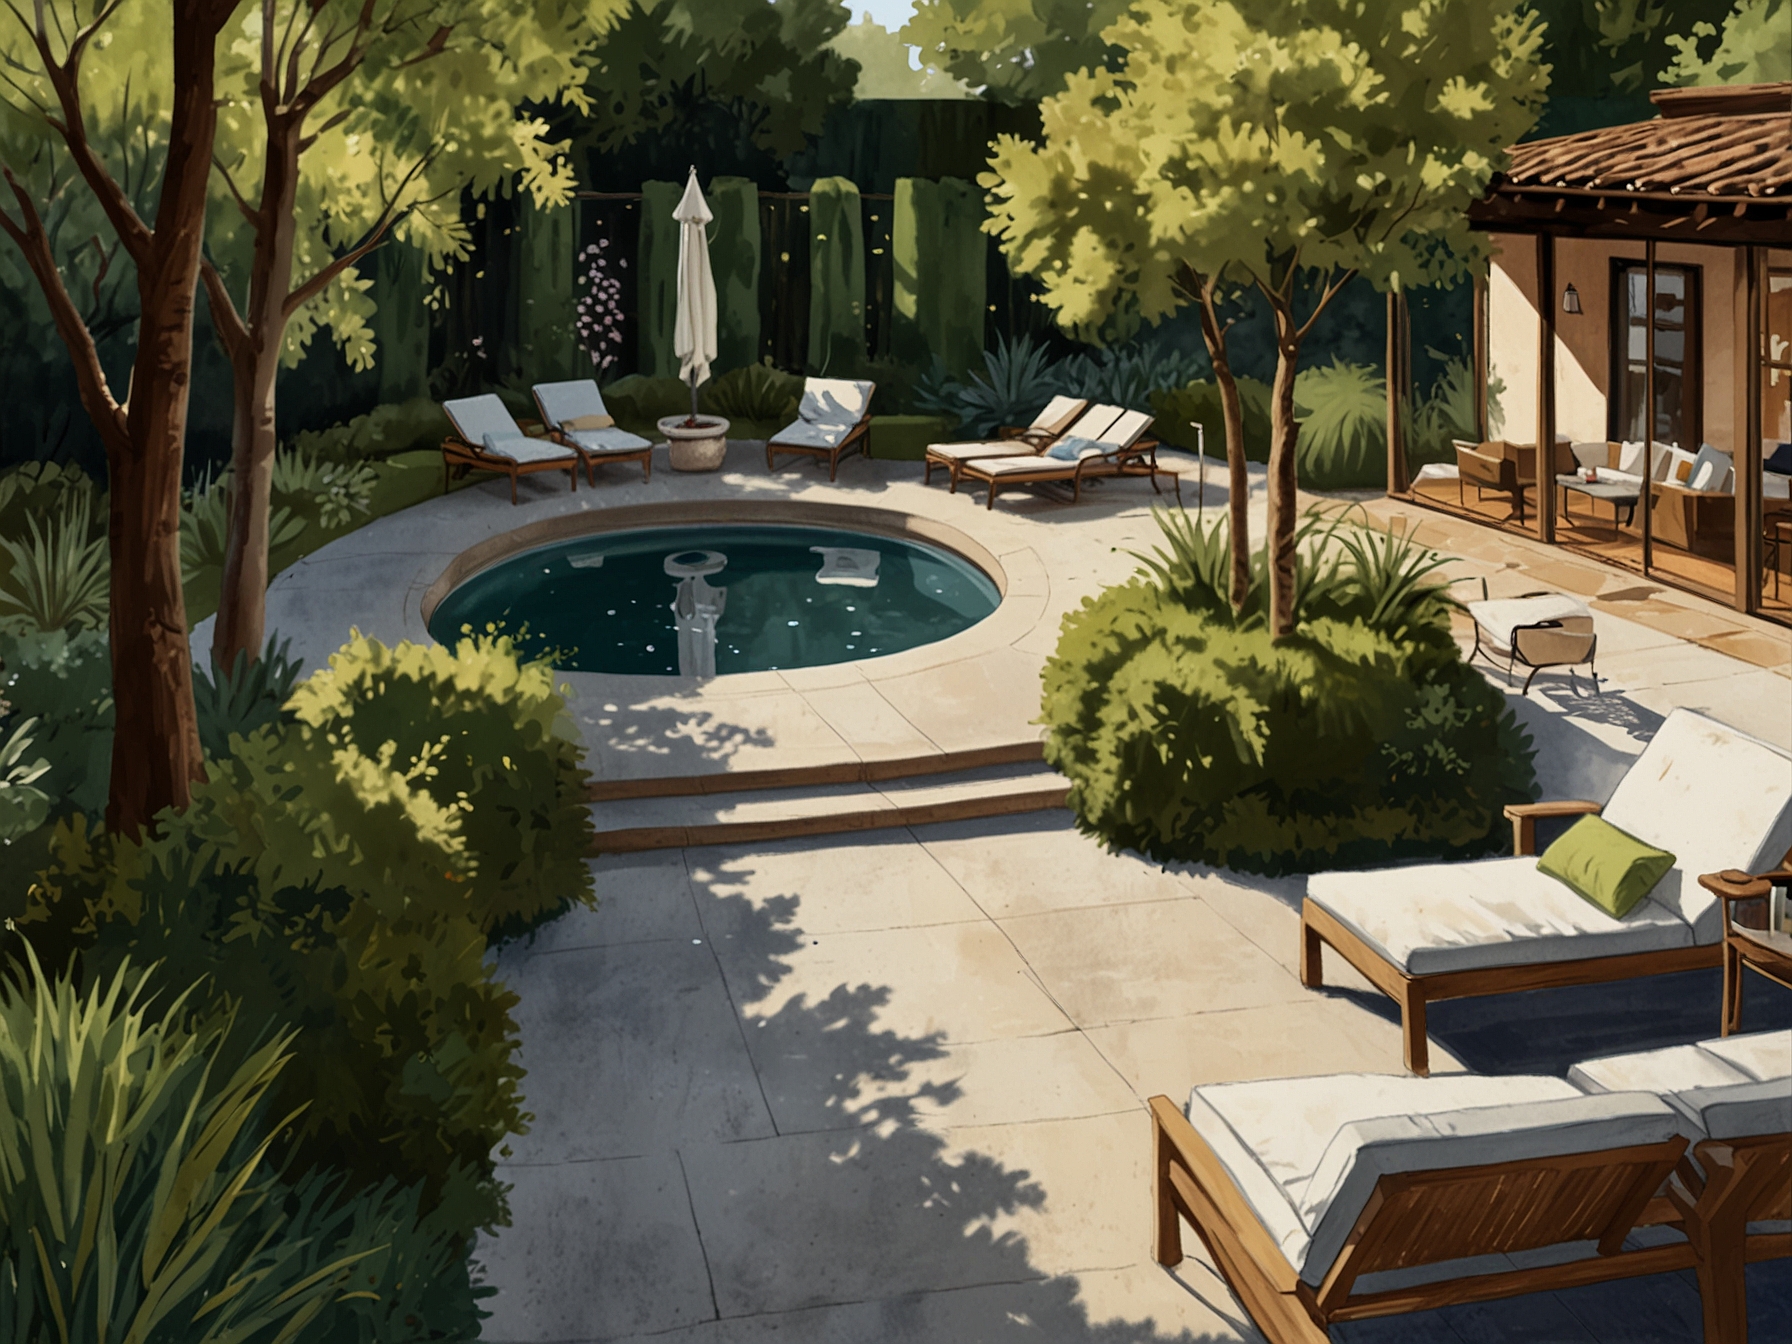 The backyard of Christina Ricci's LA home, featuring a meticulously landscaped garden, patio area for al fresco dining, and a sparkling pool, designed for relaxation and entertainment.